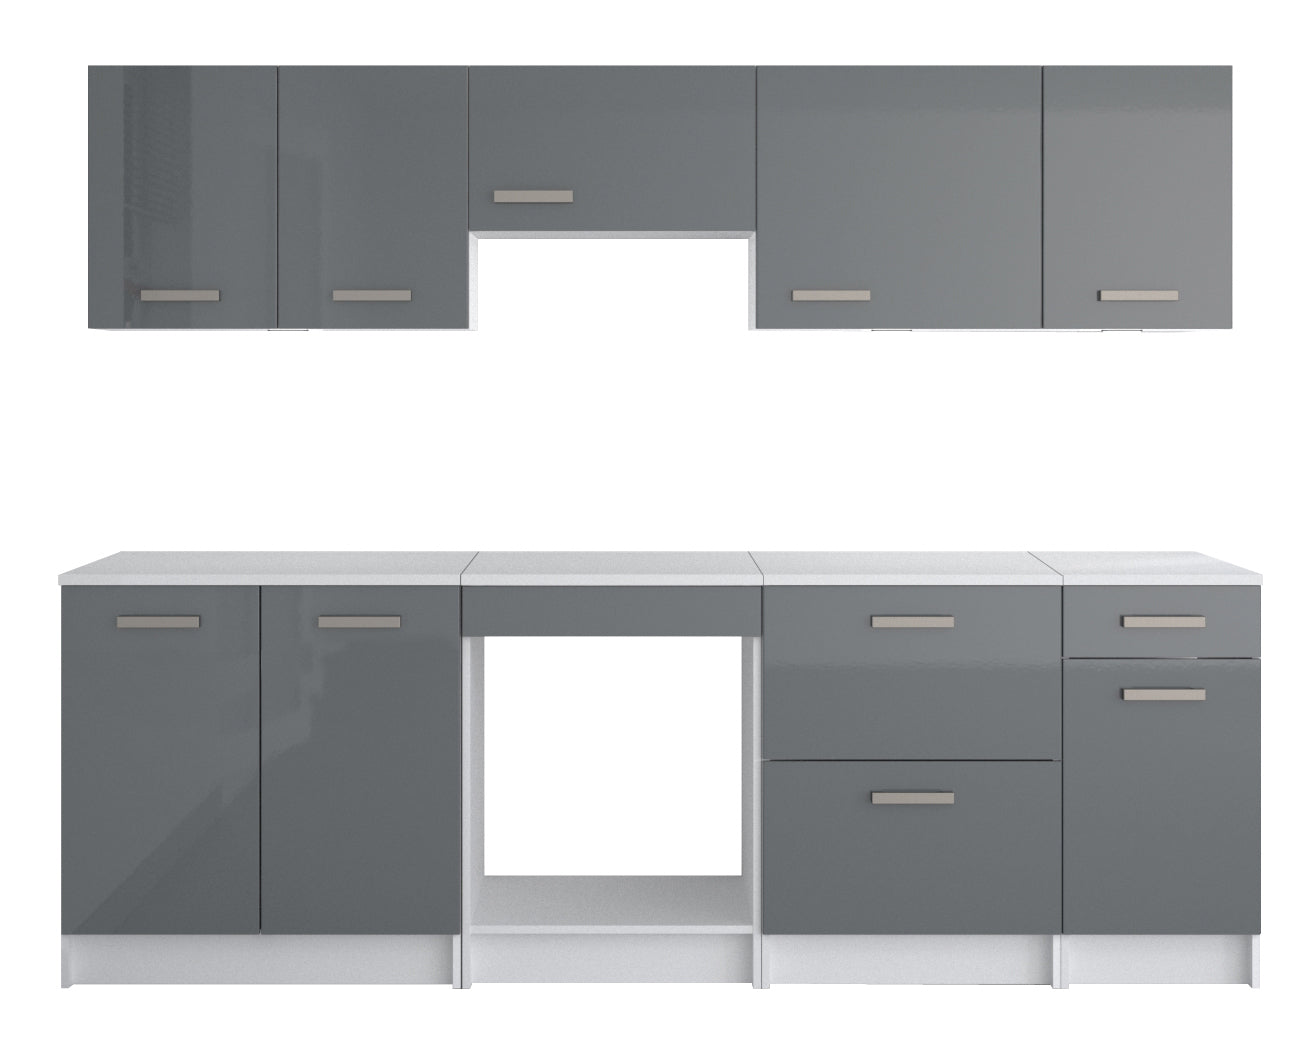 Complete linear modular kitchen furniture set 8 pcs, French manufacturing with worktop included - Clovis 240